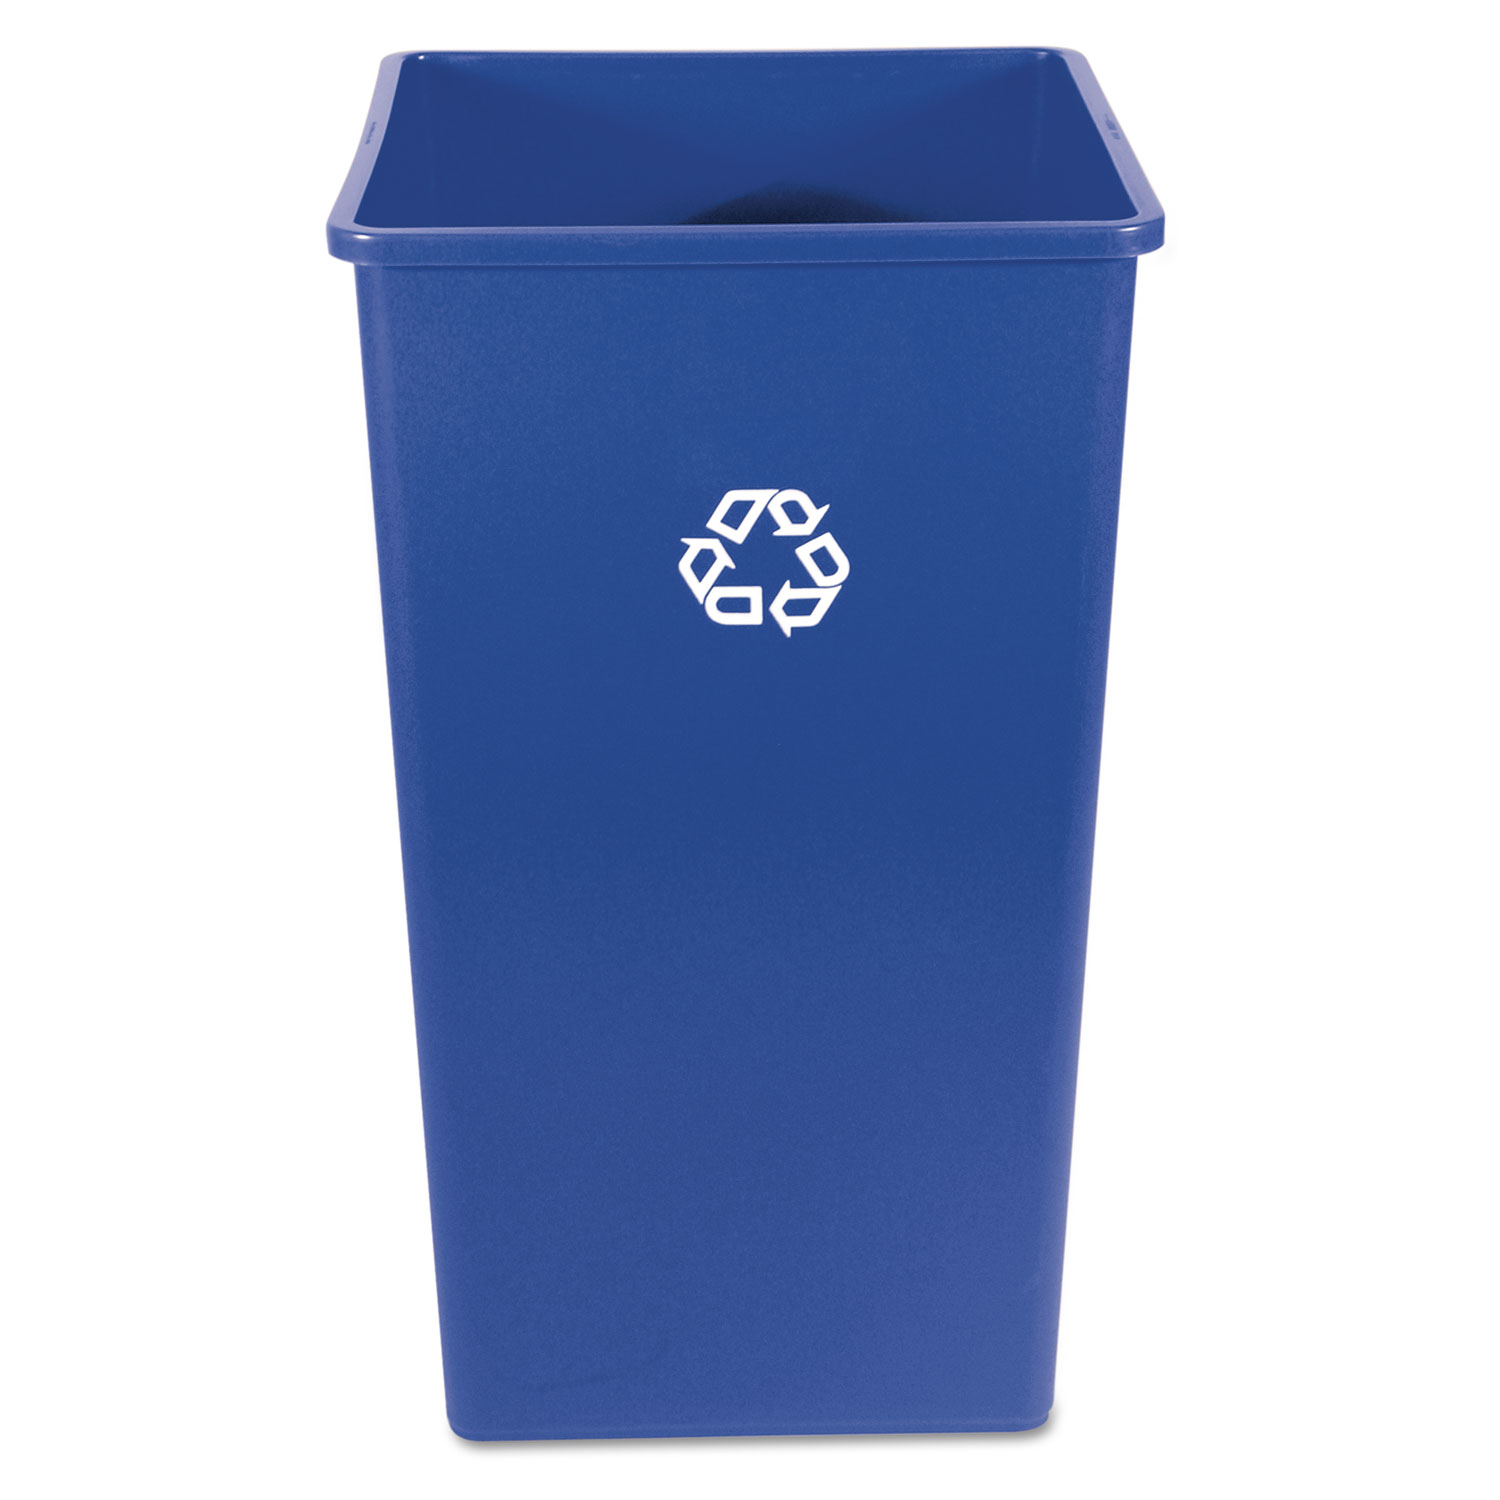 Recycling Container, Square, Plastic, 50 gal, Blue